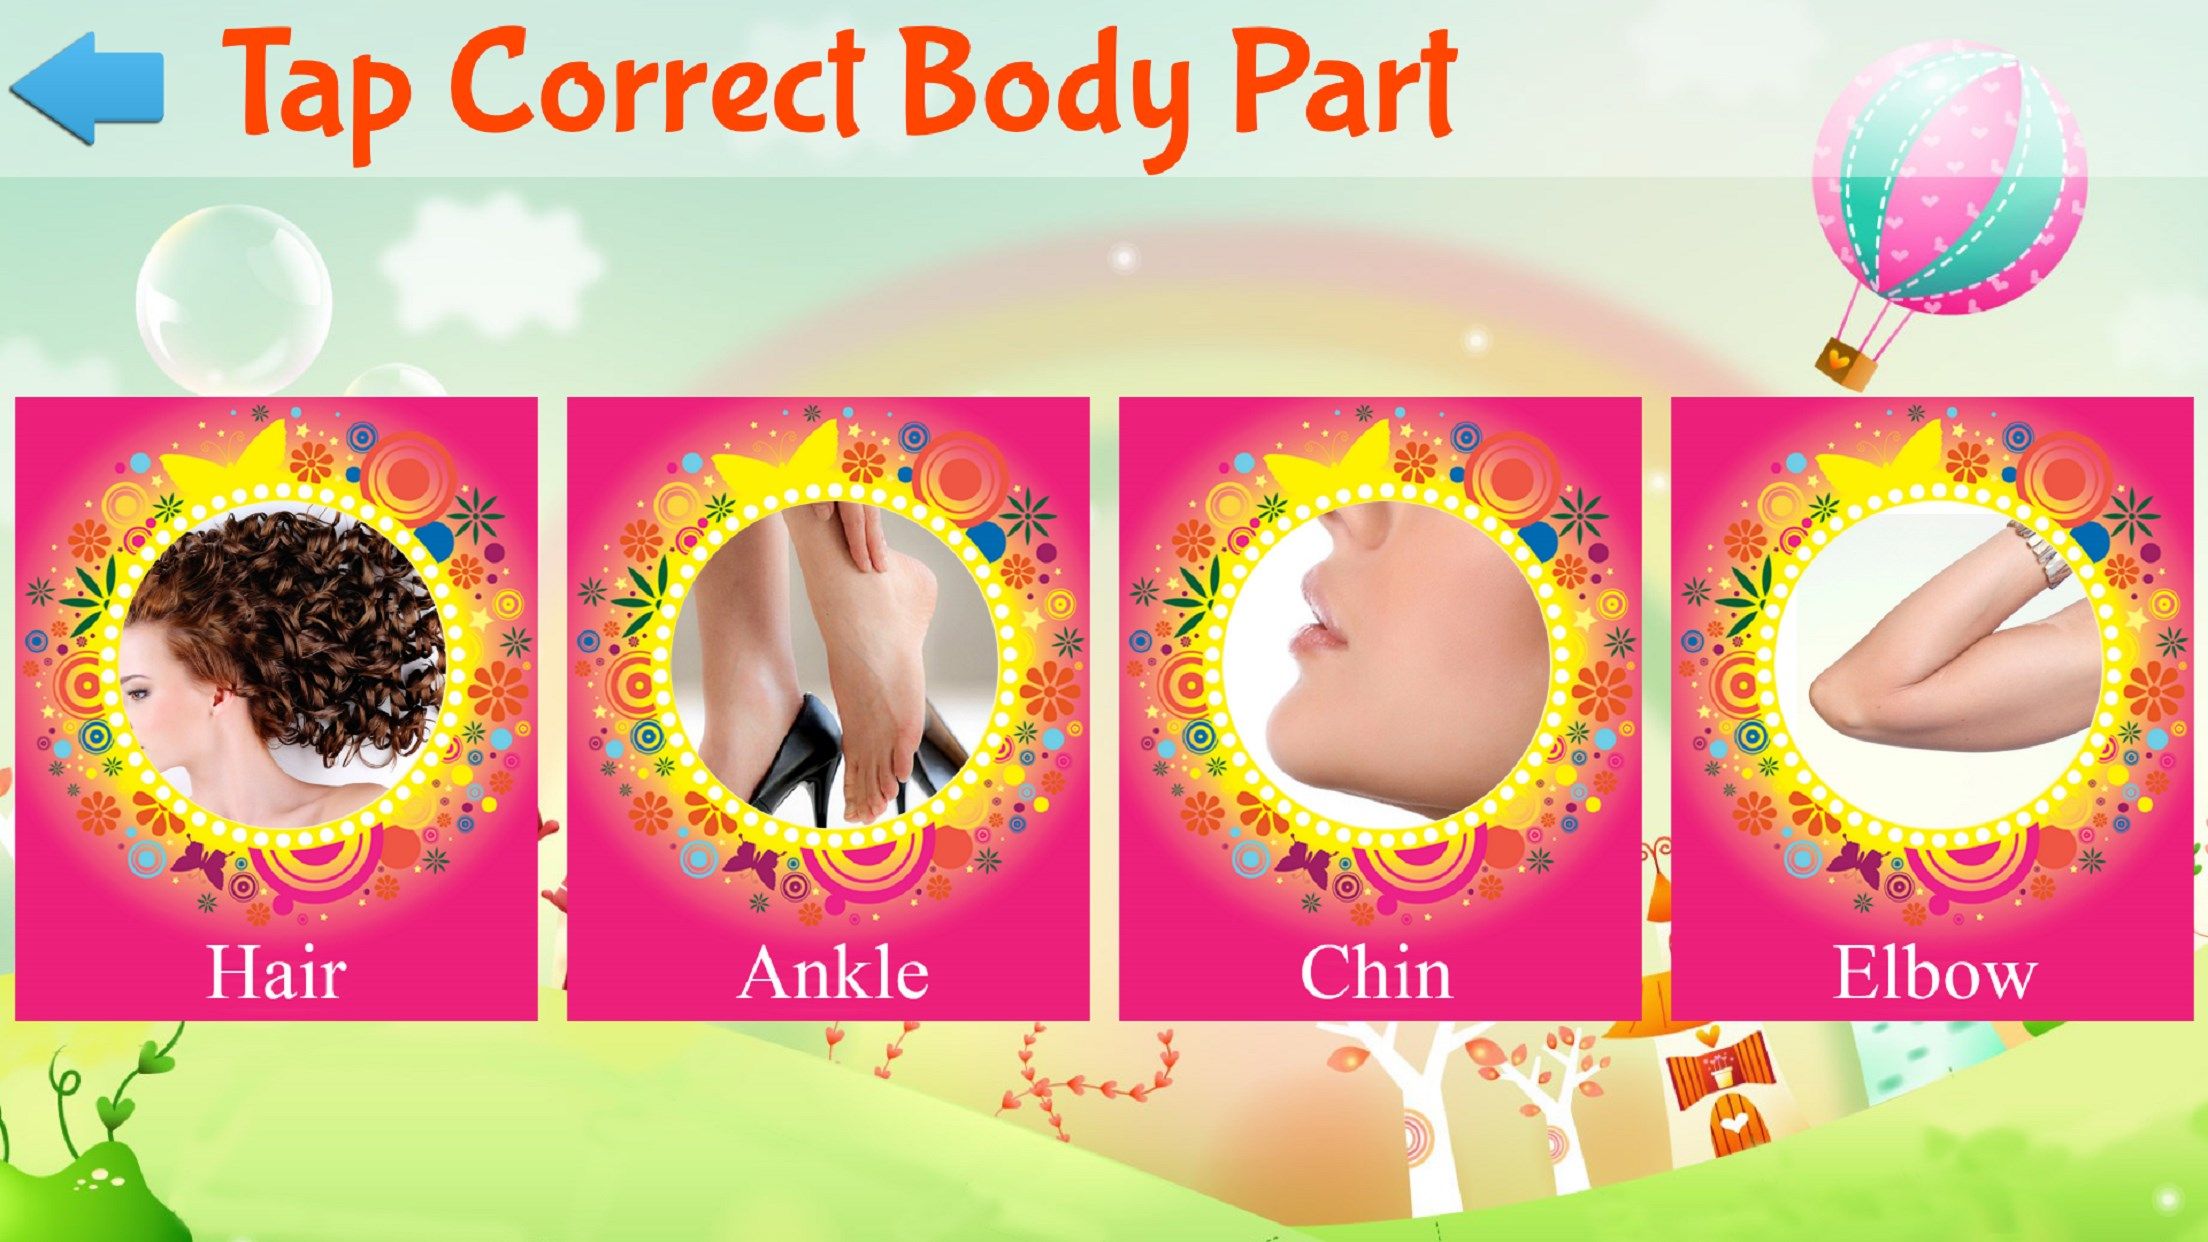 Human Body Parts for Kids